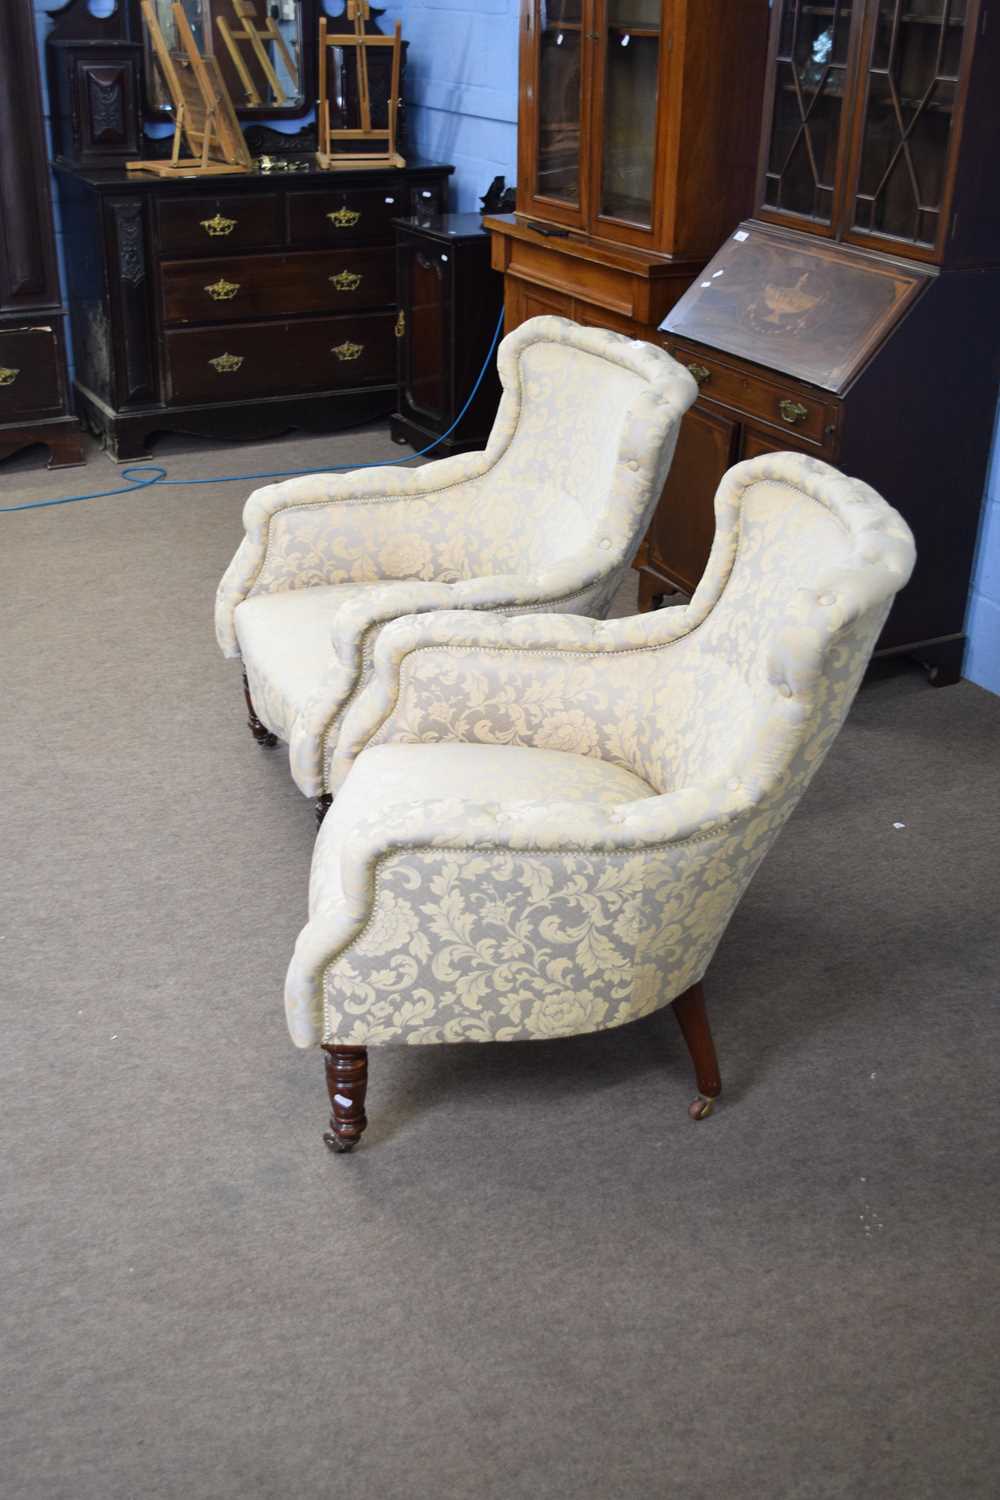 Pair of late Victorian floral upholstered armchairs with front turned legs, 85cm high - Image 2 of 2